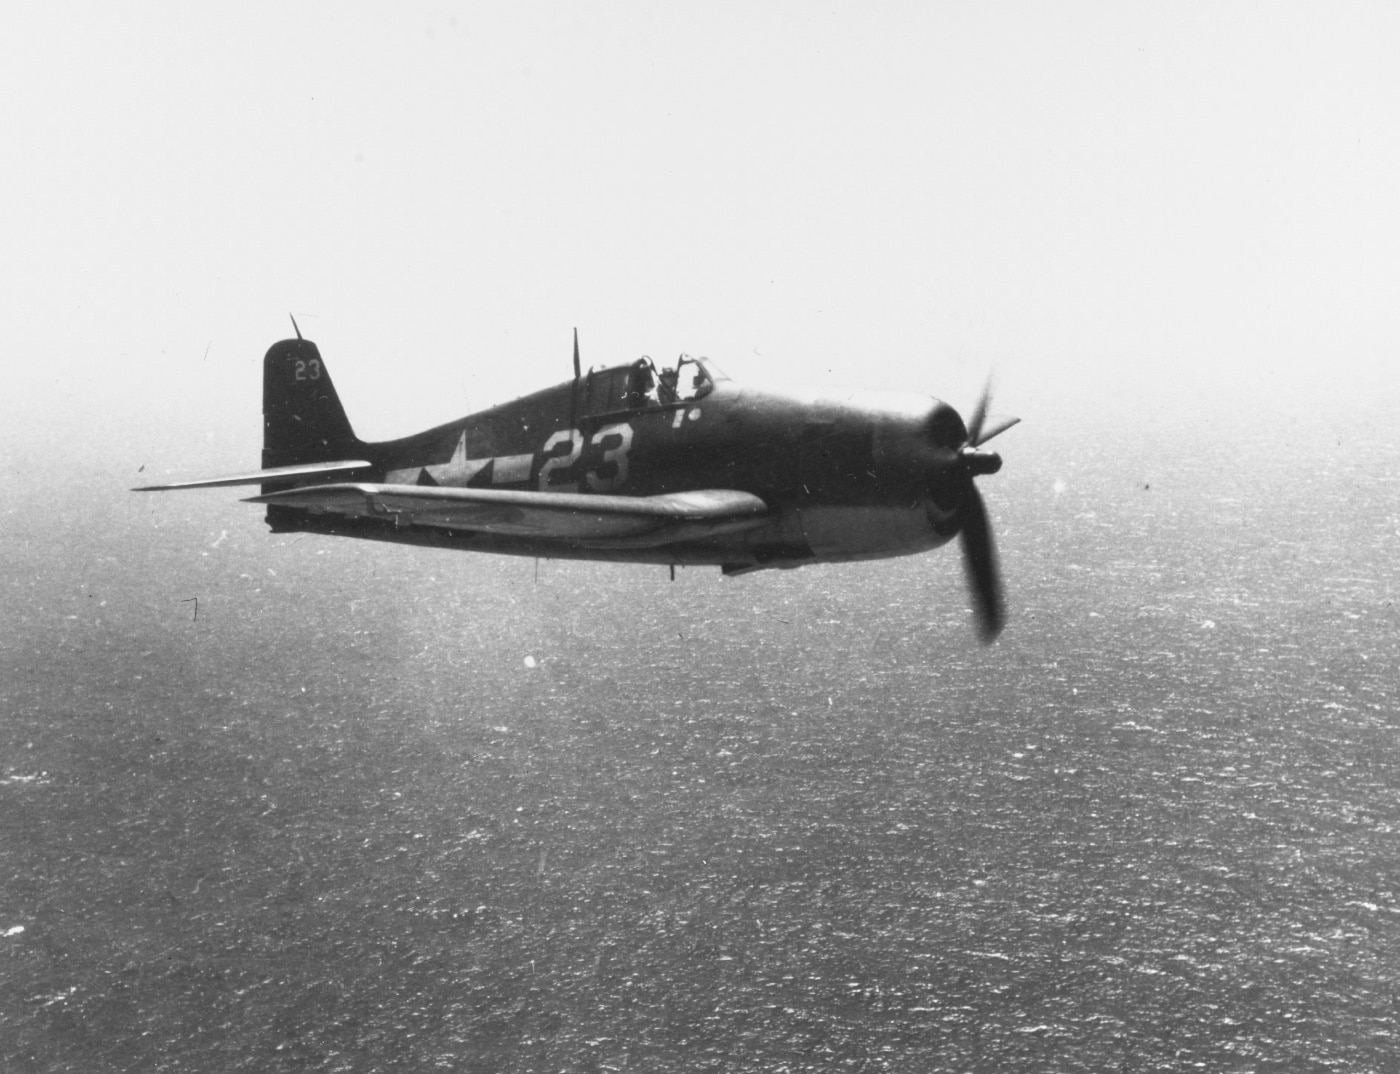 f6f in flight over pacific ocean in 1943 during world war 2